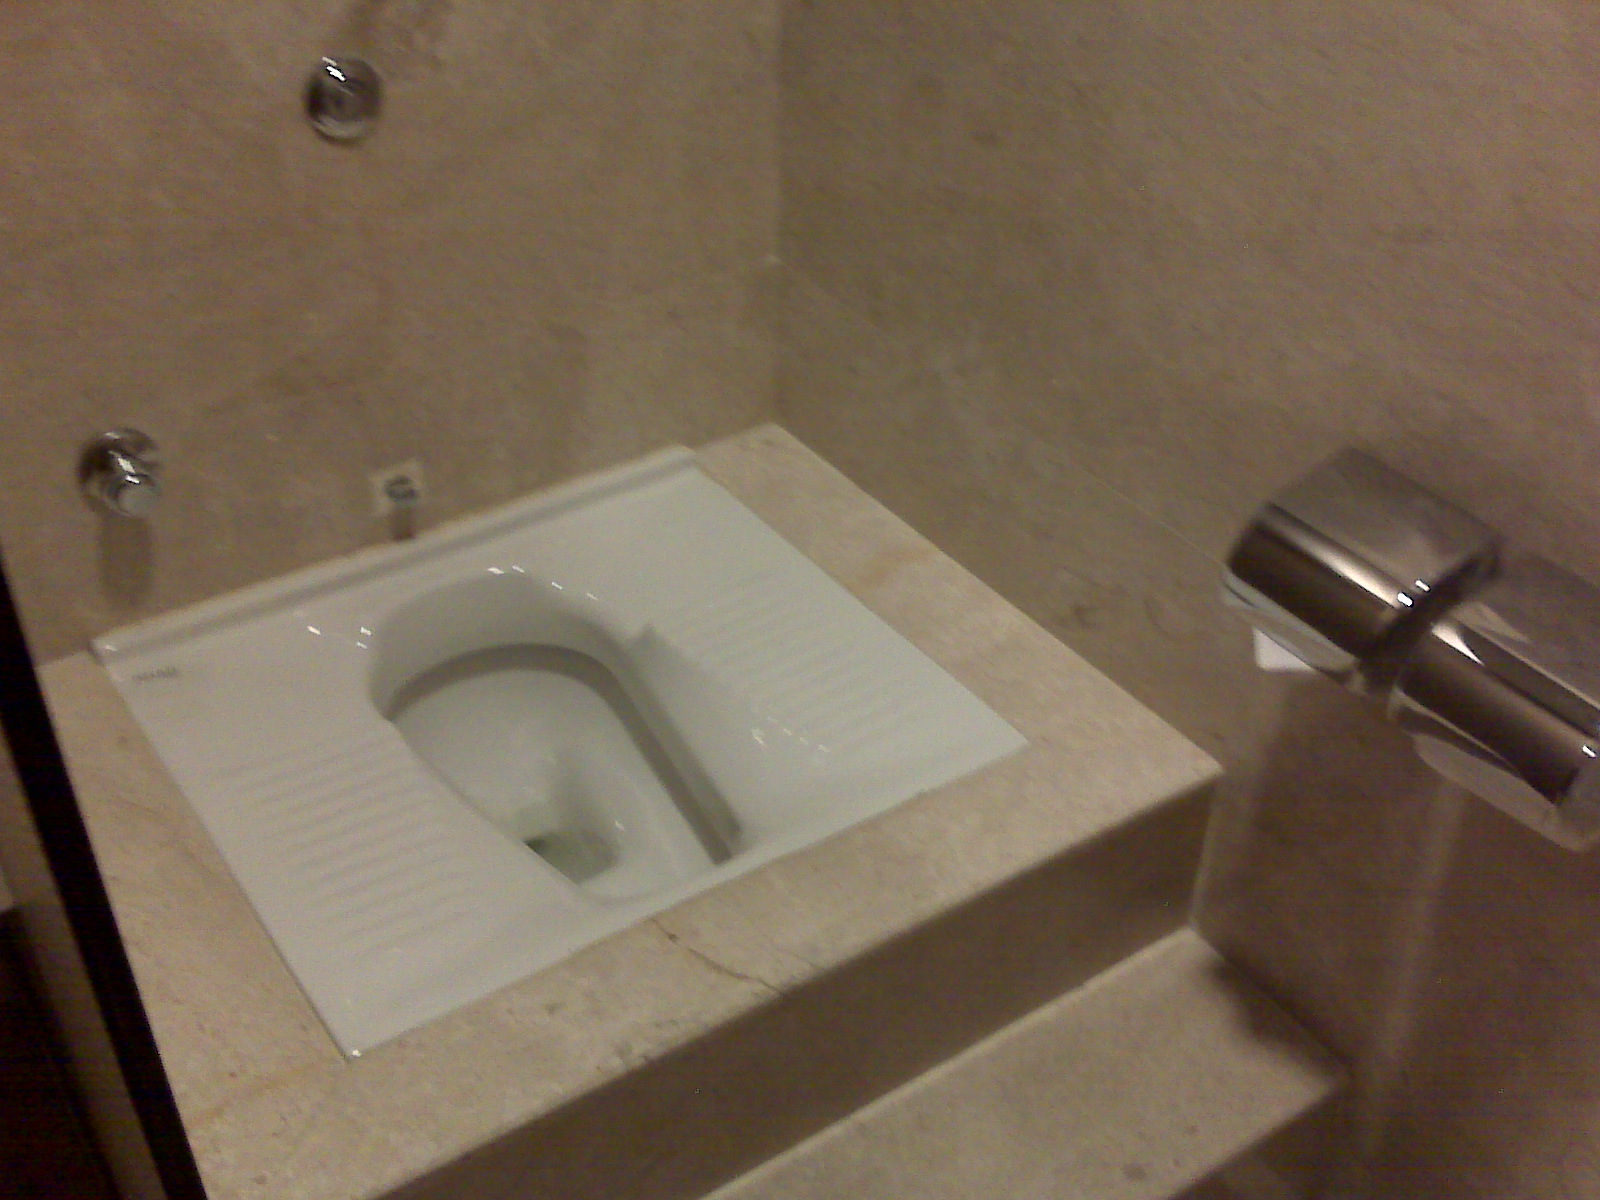 a white toilet sitting inside of a bathroom stall